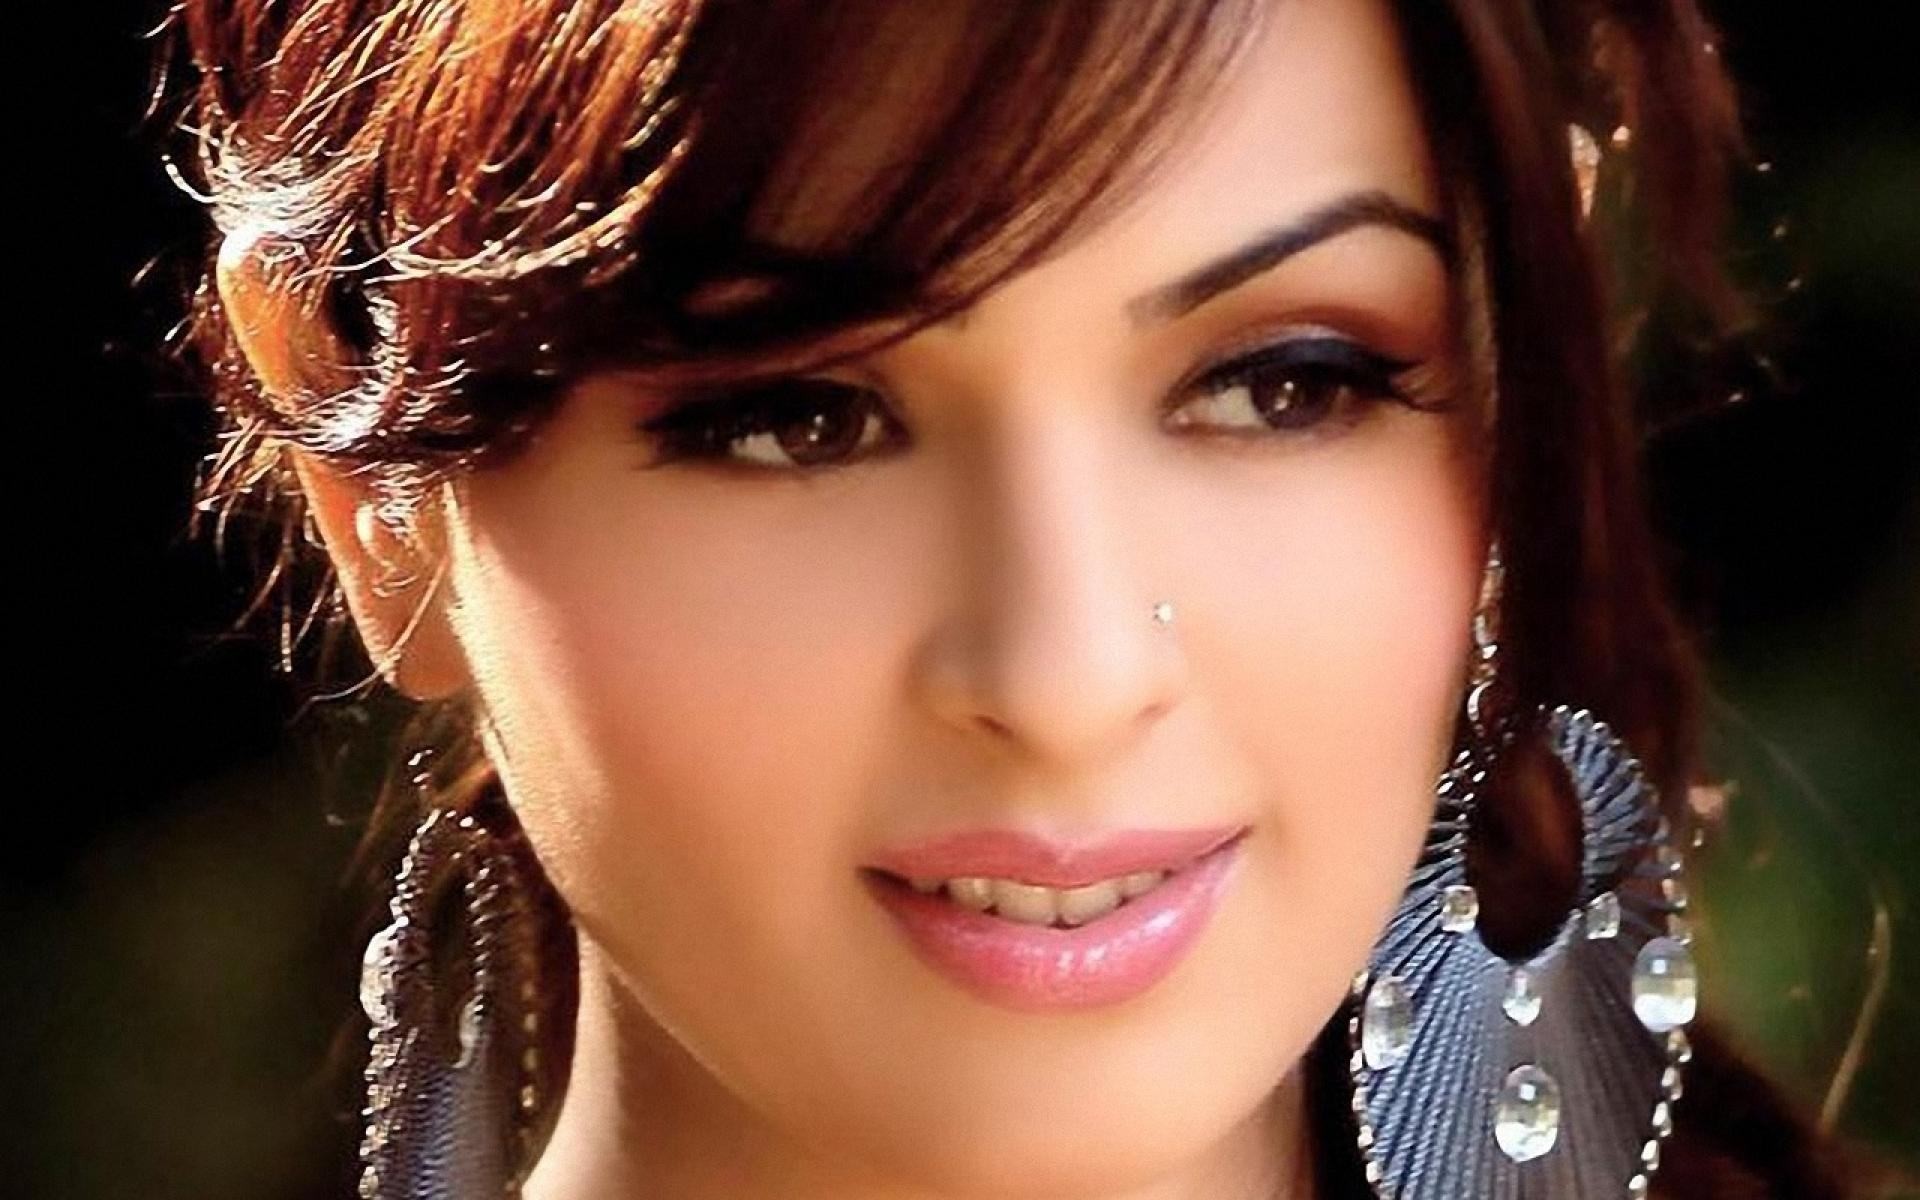 bollywood actress hd wallpapers 1080p free download,hair,face,eyebrow,hairstyle,lip